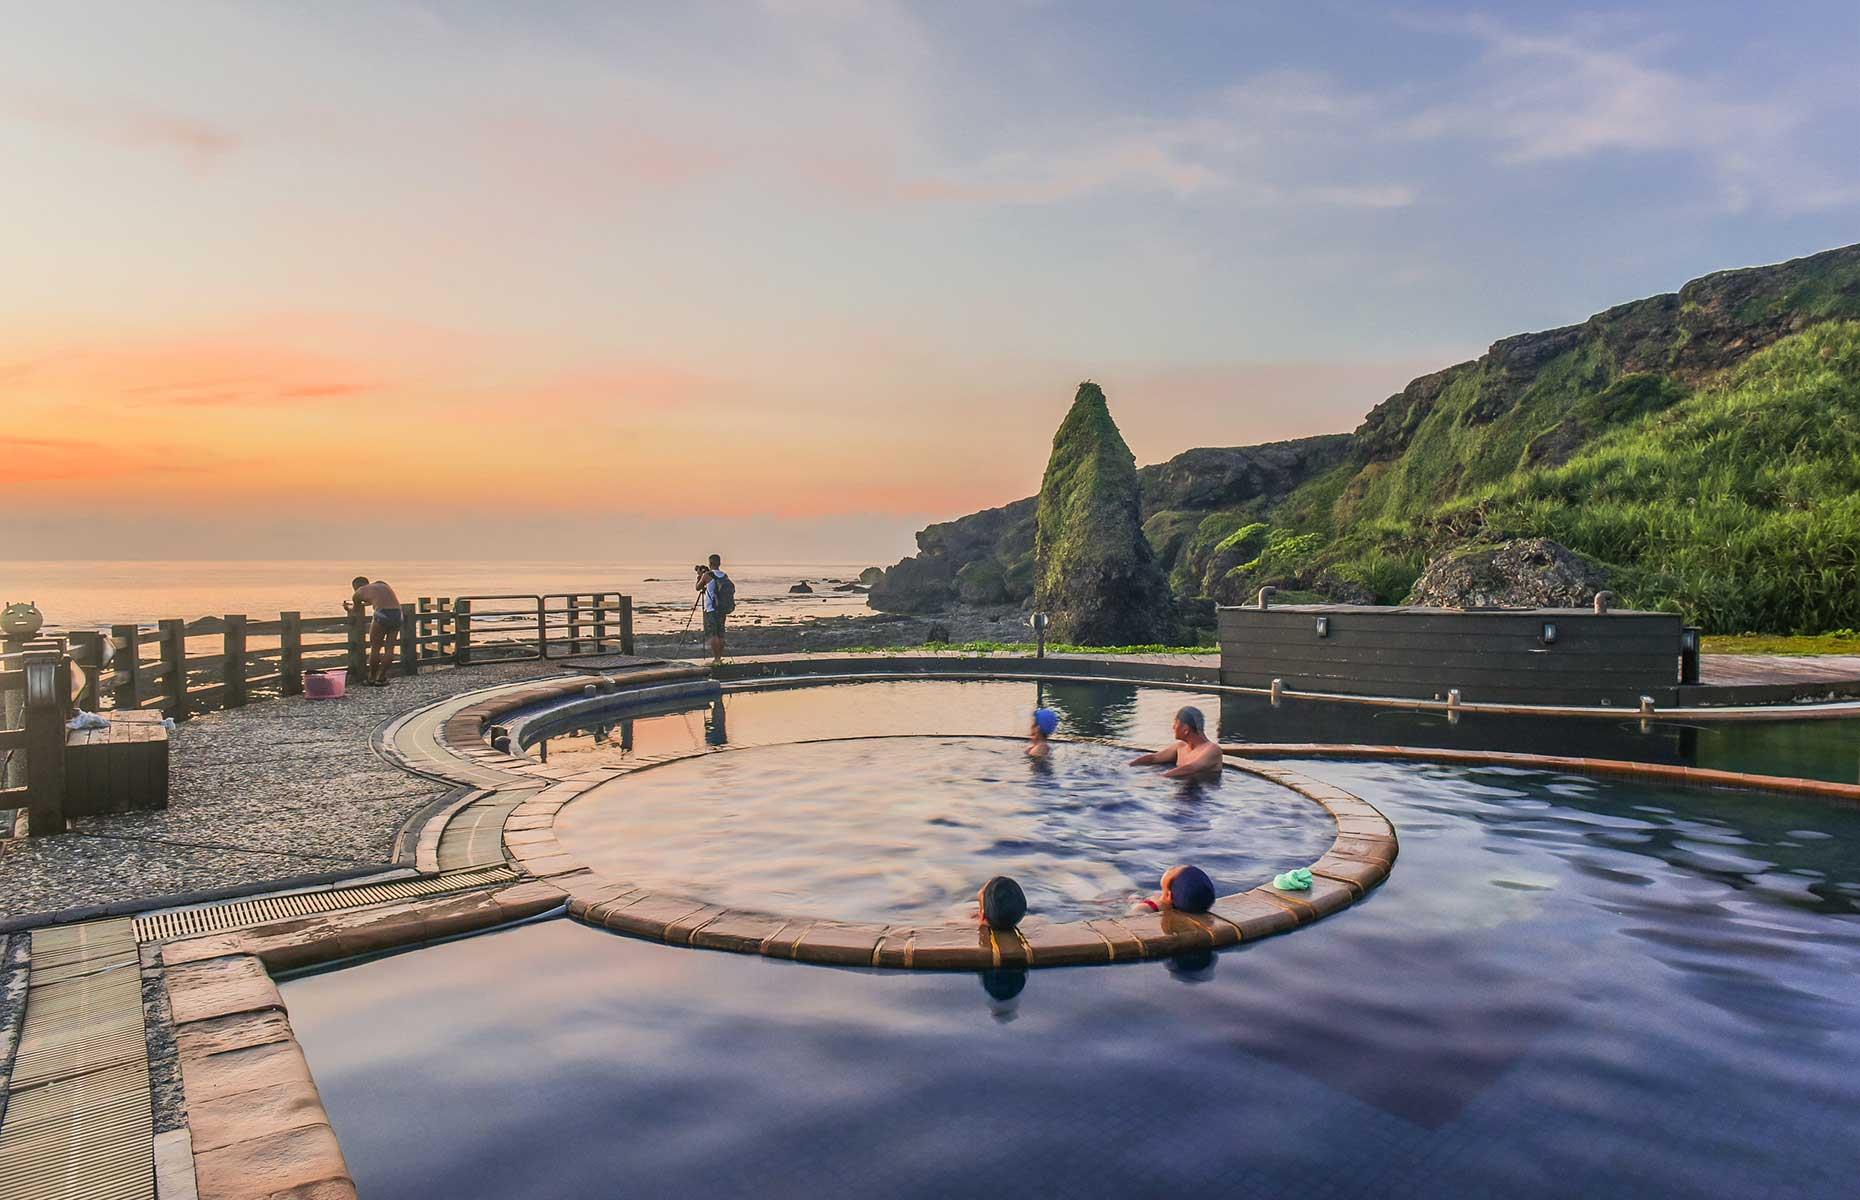 <p>Zhaori Hot Springs is one of only three saltwater hot springs in the world – the other two are on Kyushu Island, Japan and in Sicily, Italy. Zhaori’s ideal water temperature simmers between 140°F to 158°F (60<strong>°</strong>C-70<strong>°</strong>C) and is fed by seawater and underground water heated by the volcanic lava on the island (Green Island is home to an active volcano). This seafront spa has three open-air pools and indoor options, but it’s worth heading here early to watch the sunrise which will undoubtedly set you up for the day. Regardless of when you visit, enjoy the views looking out towards the sea. </p>